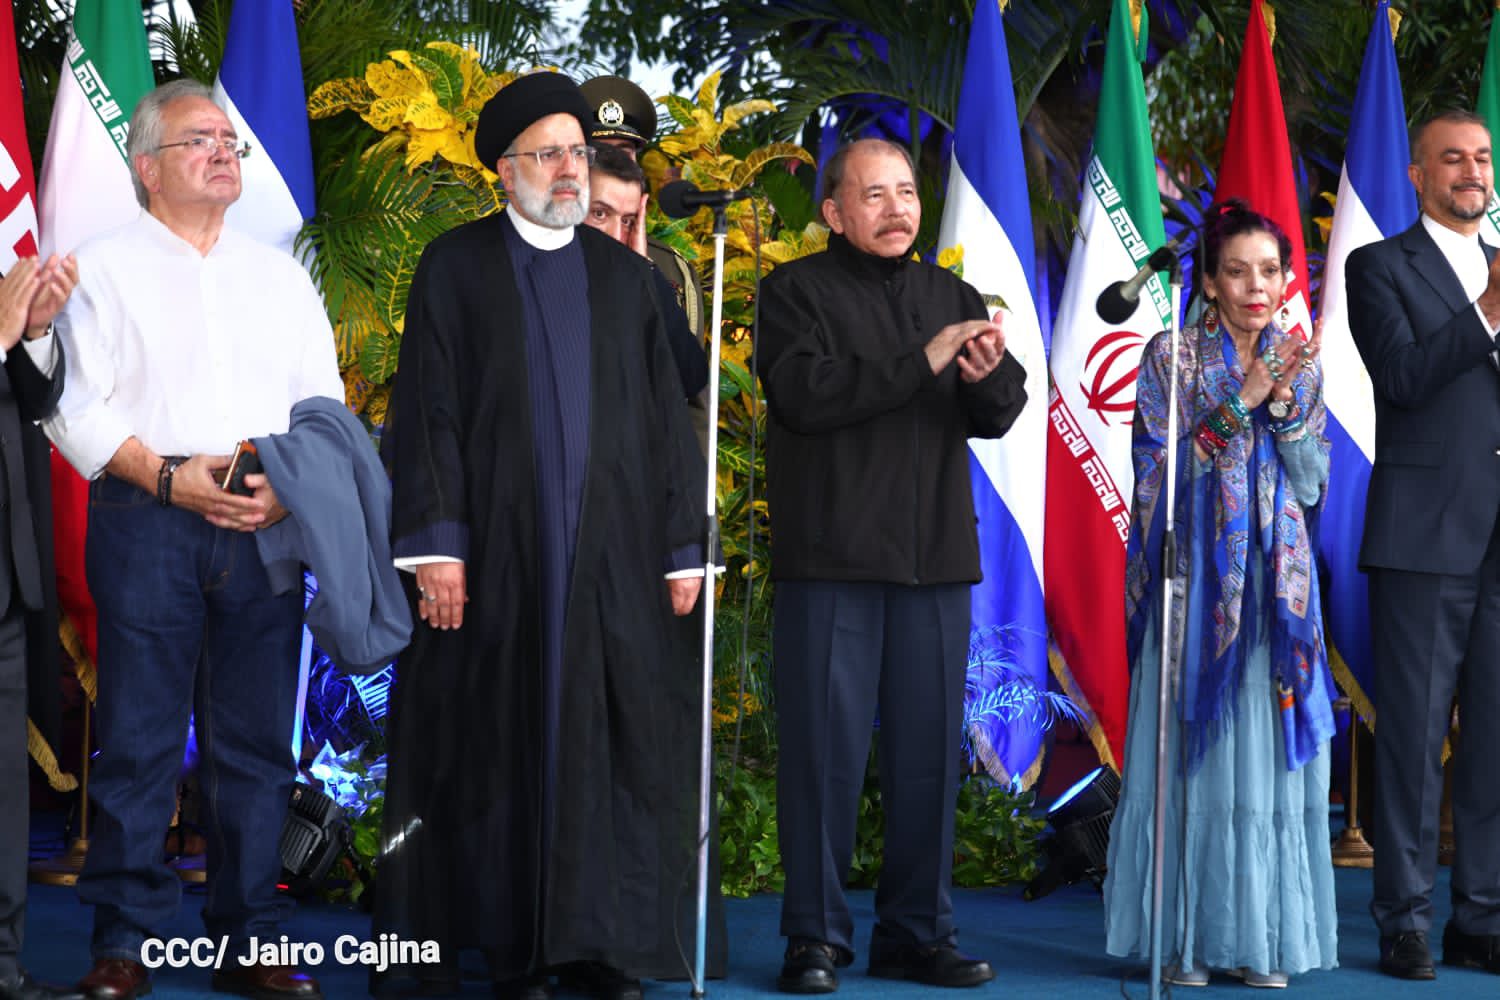 Ortega and Murillo consolidate alliances with dictatorships that bring no economic benefits